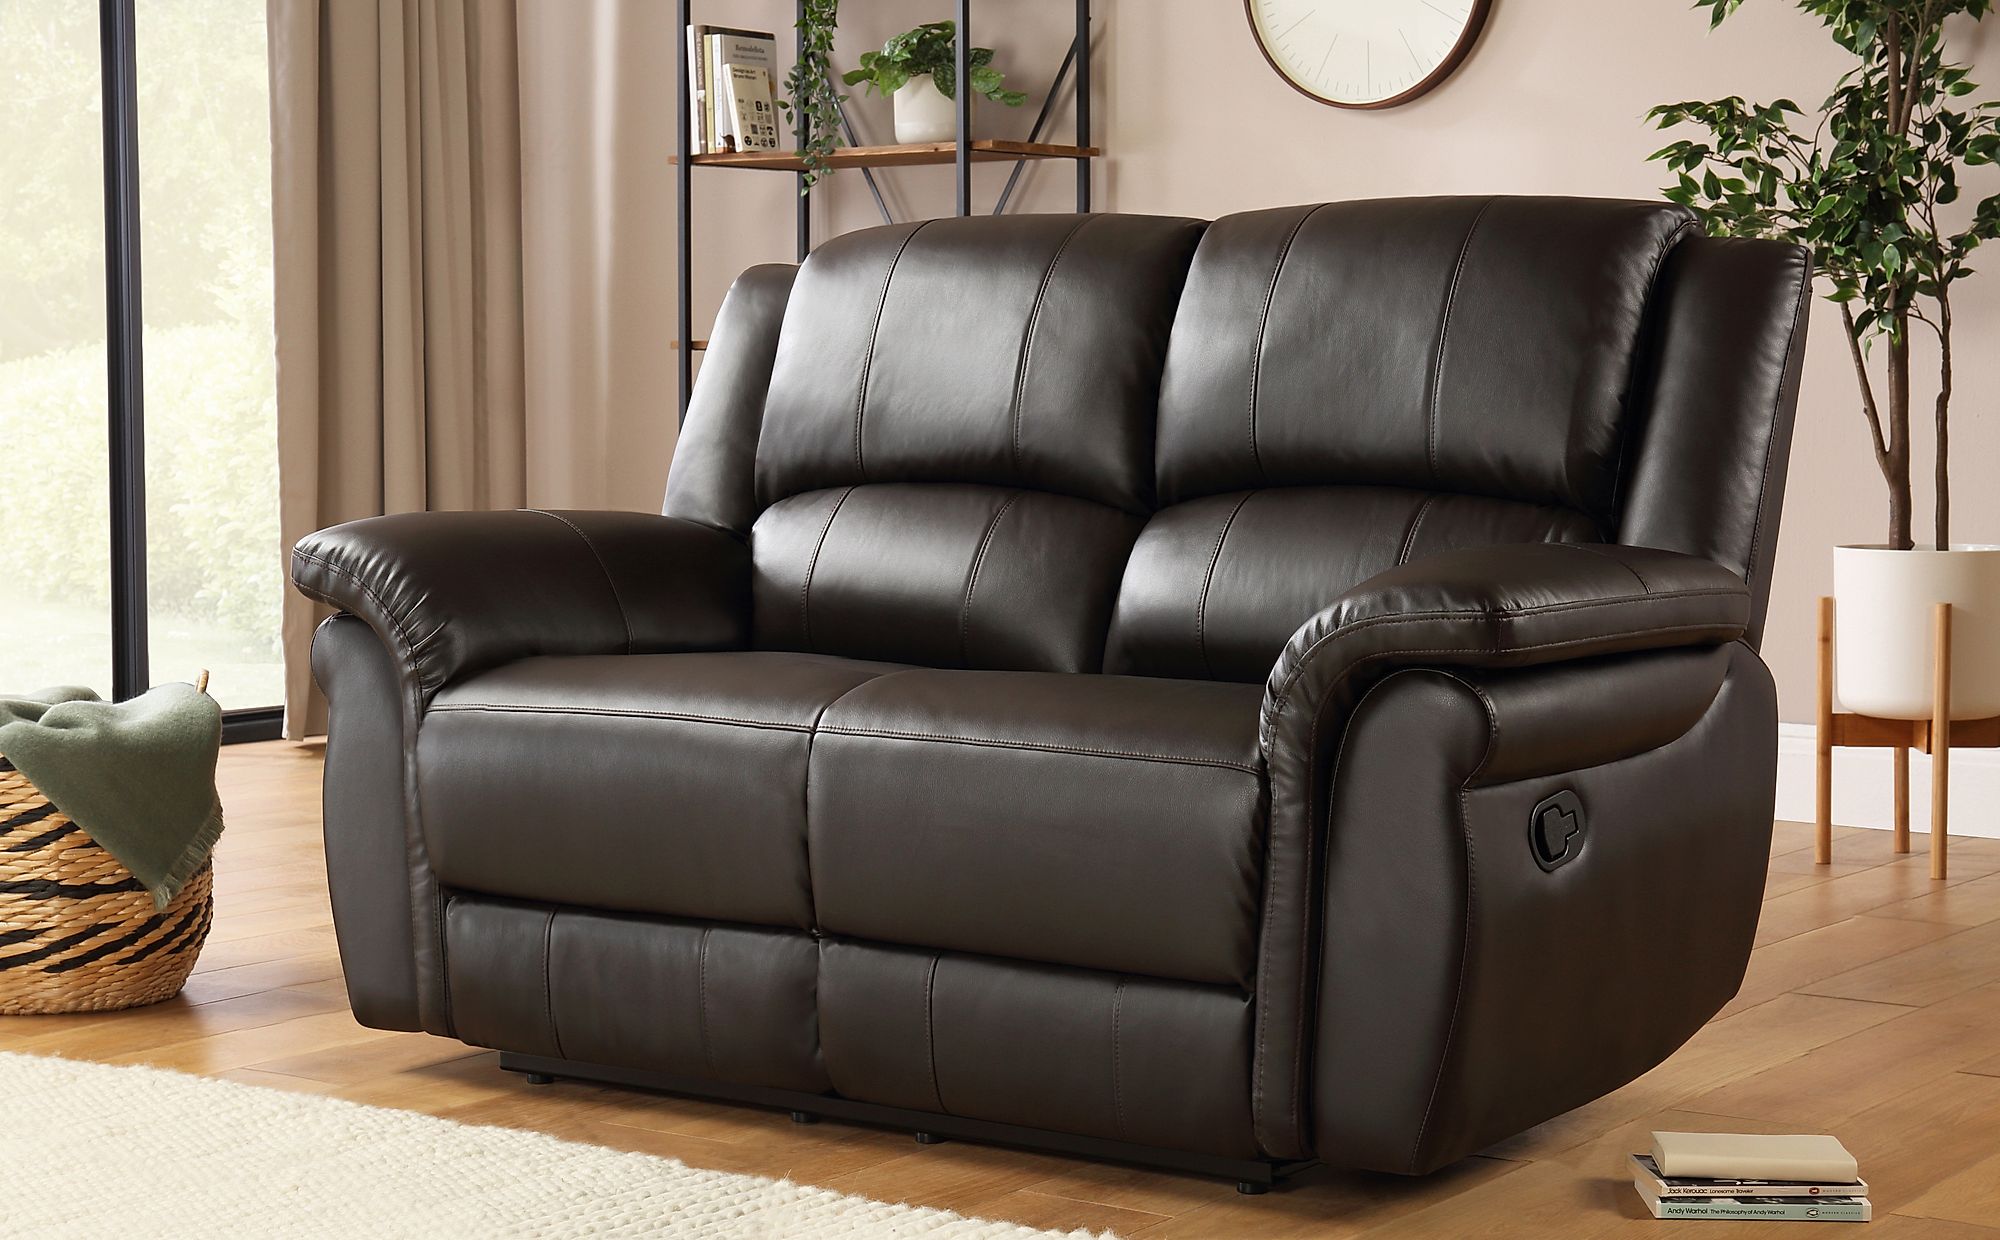 drop down brown leather sofa recliner